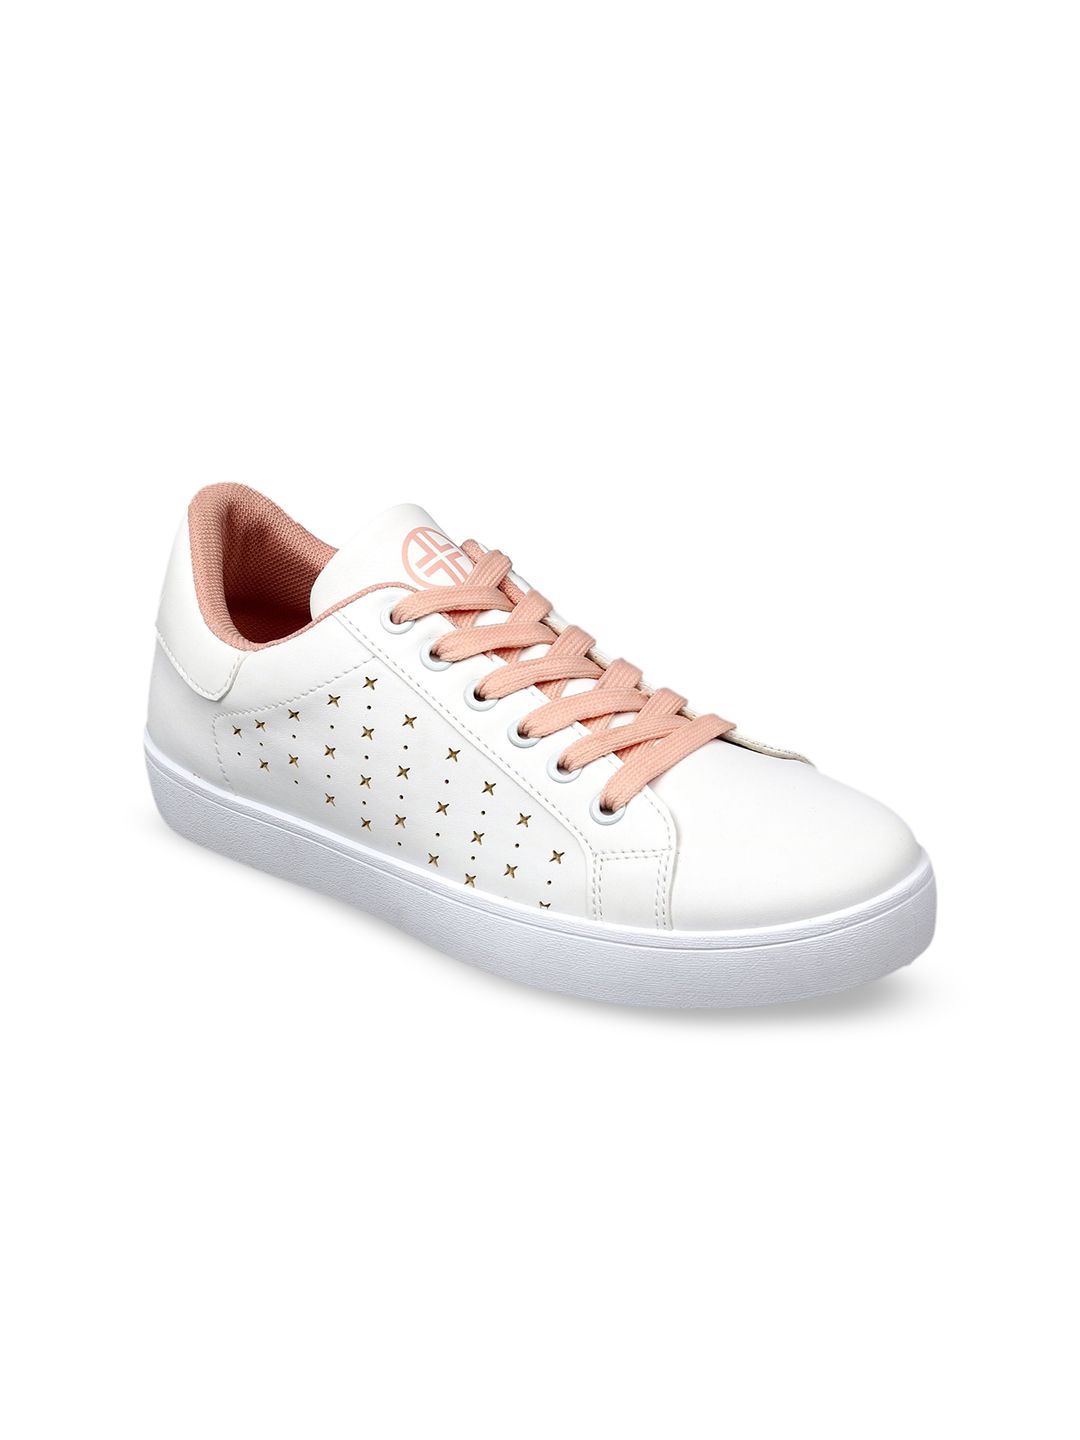 Lavie Women White & Gold-Toned Laser Cut Sneakers Price in India